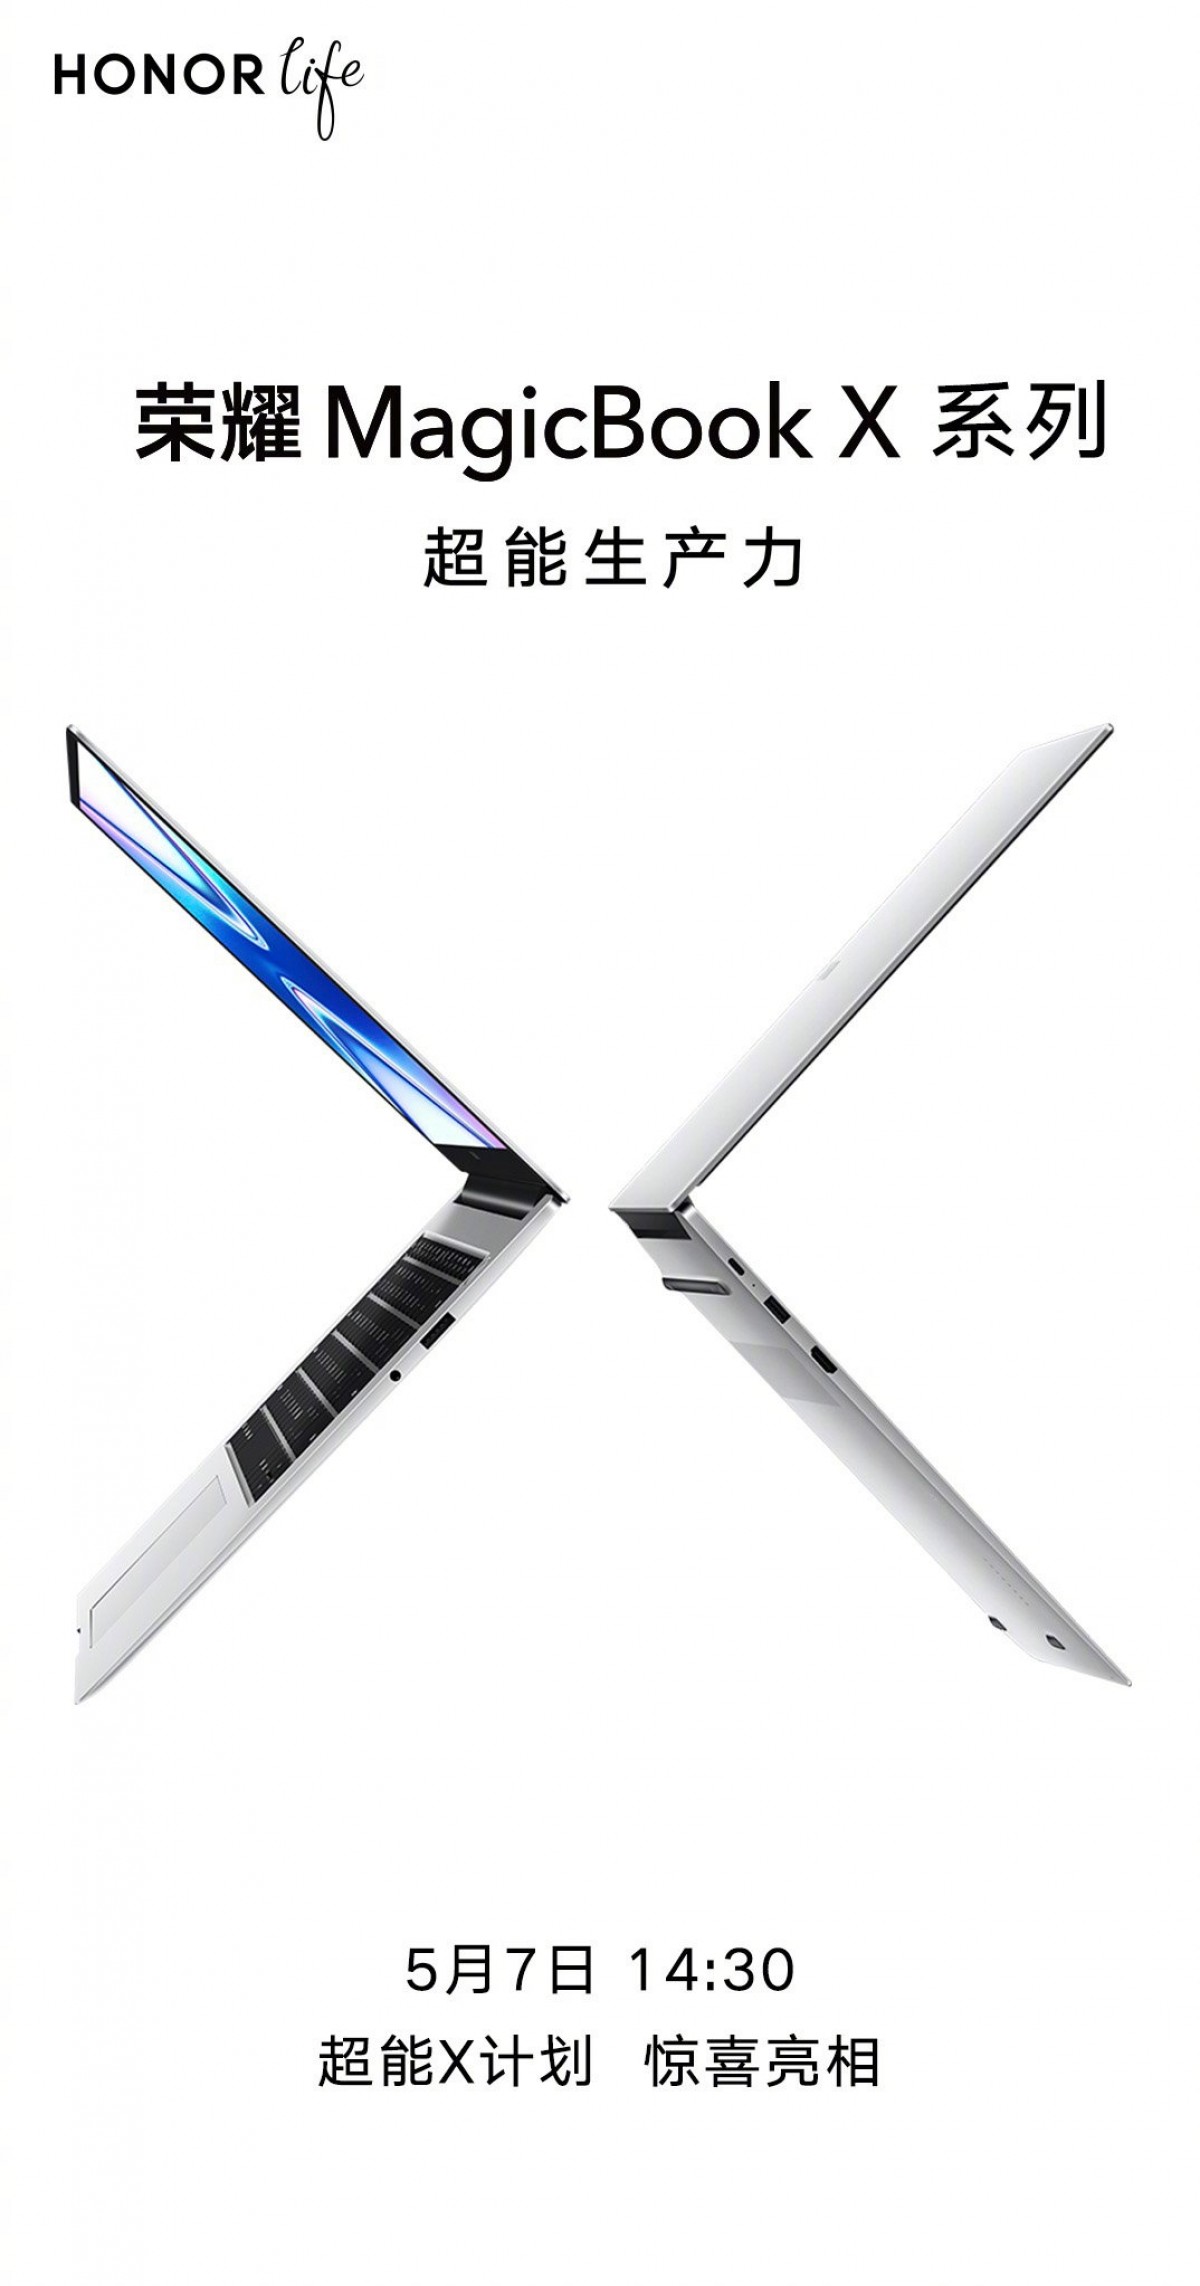 Honor to introduce MagicBook X series on May 7